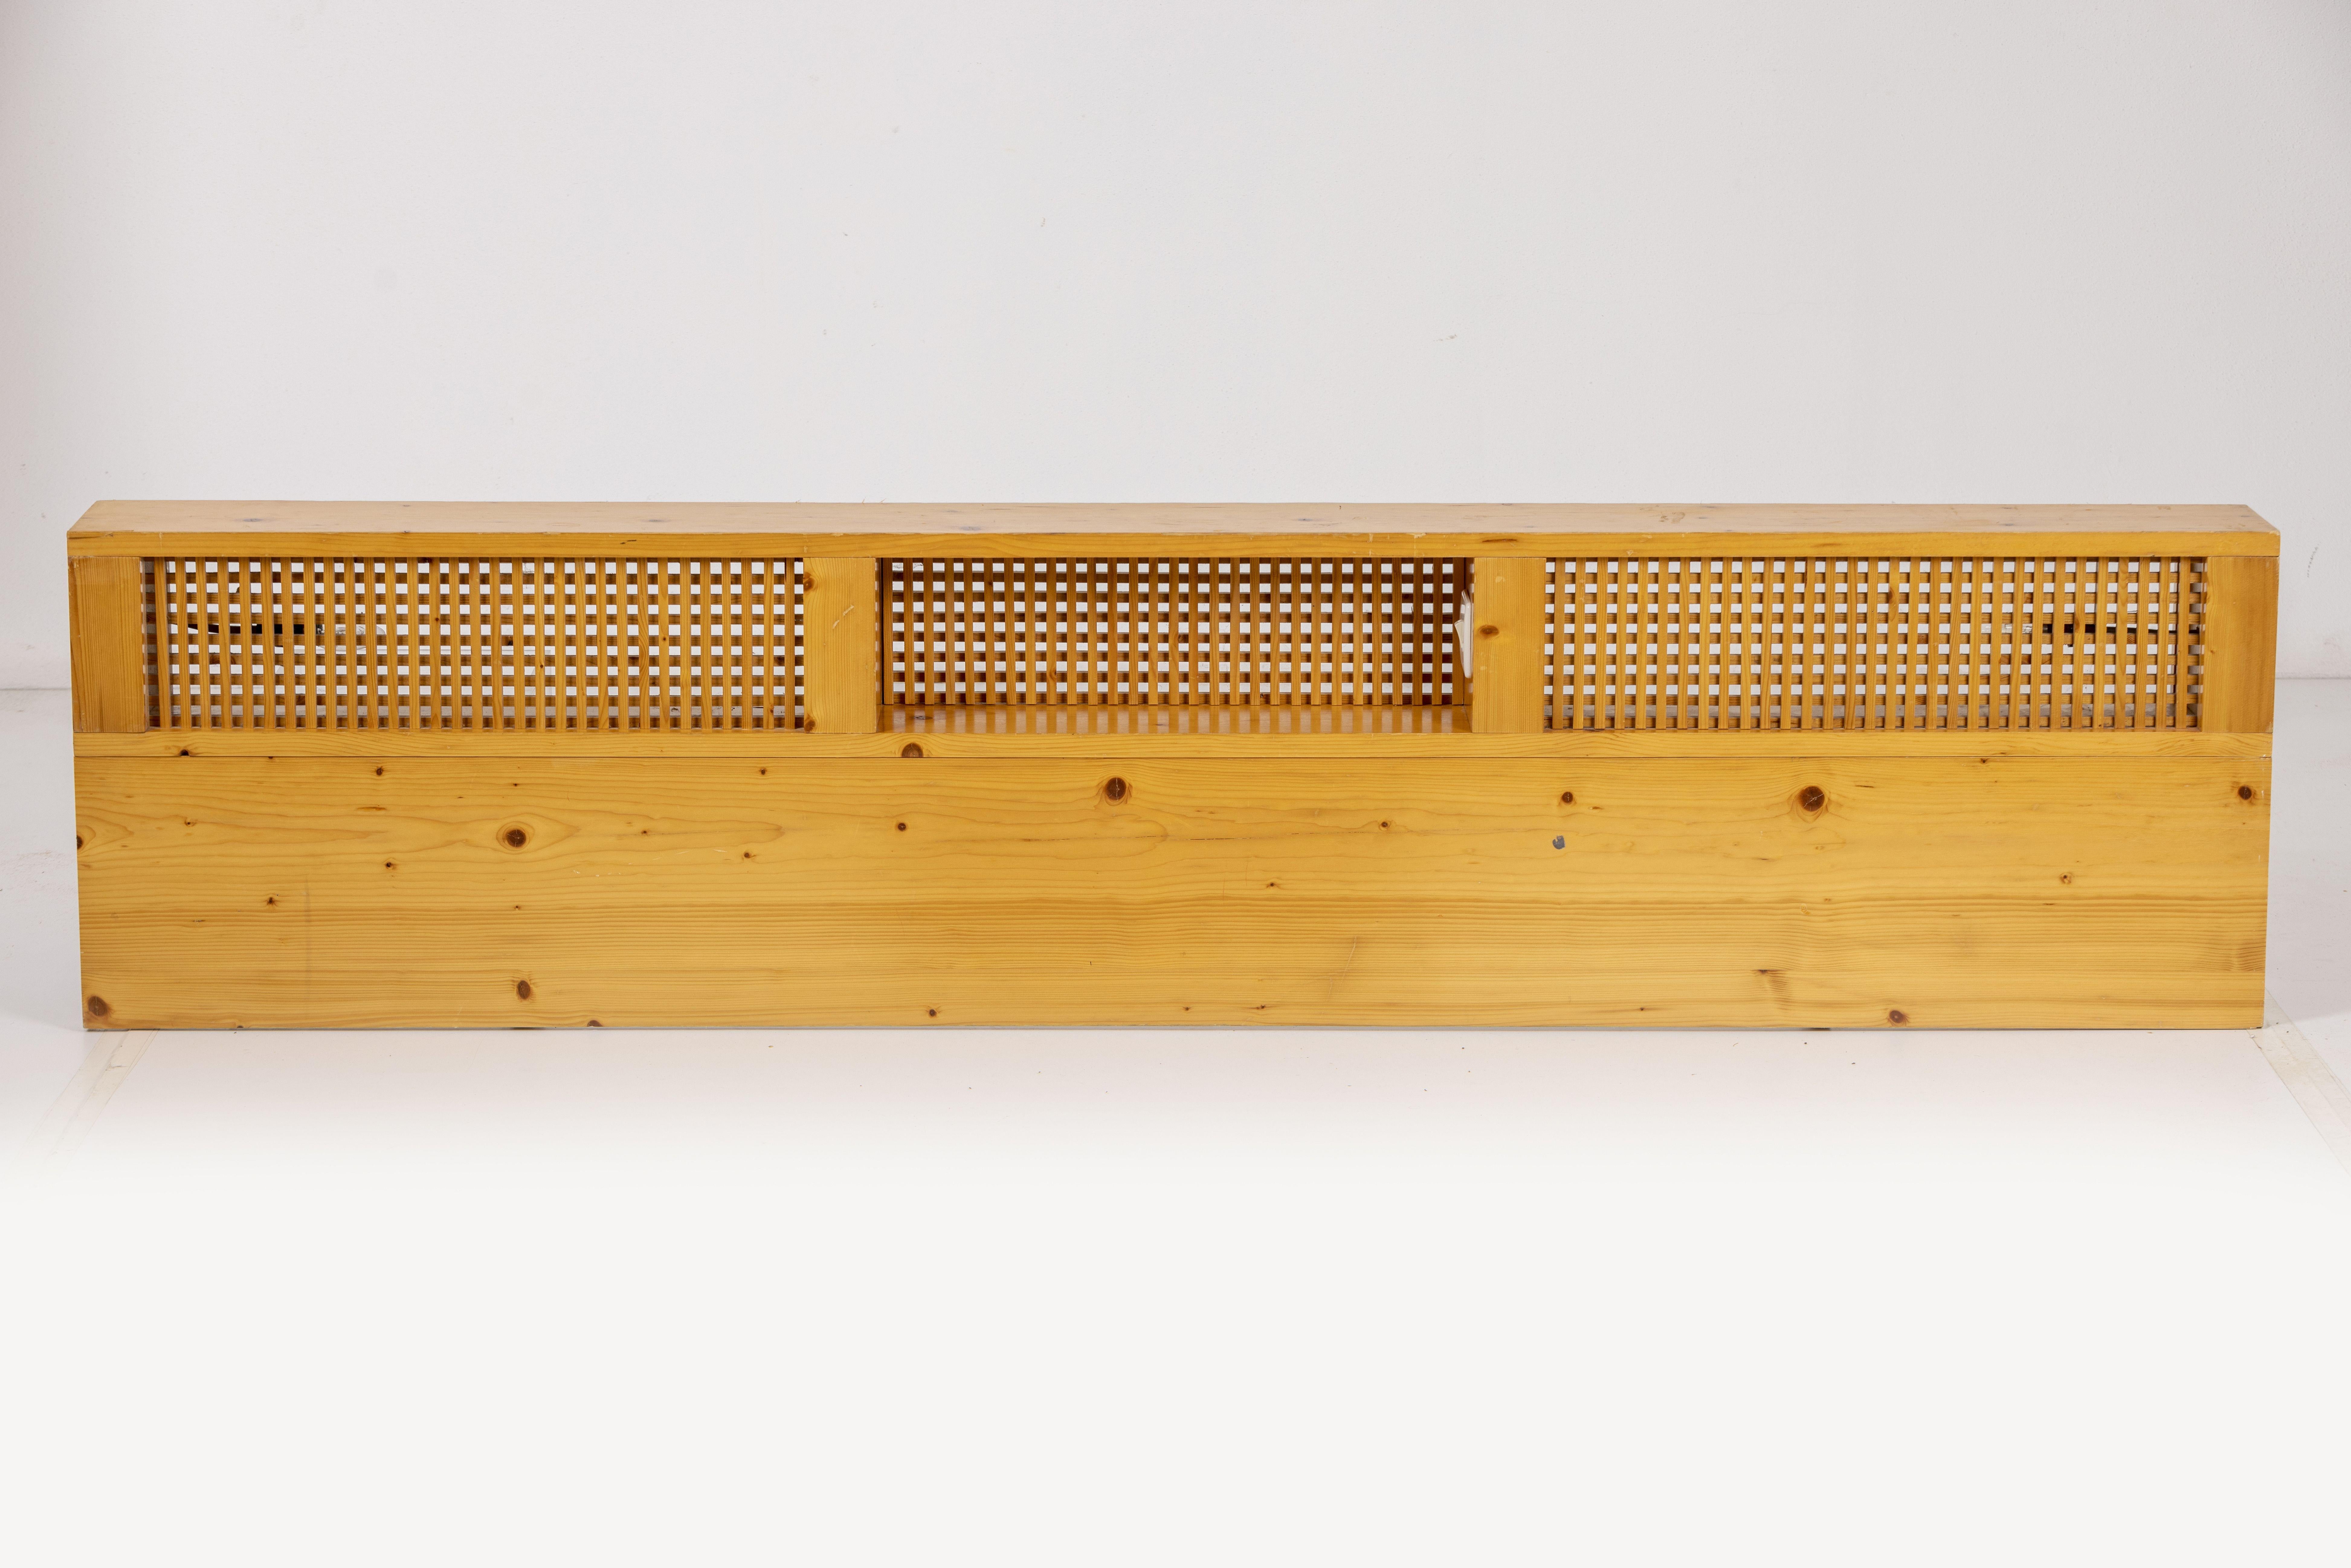 A large and rare bed headboard with integrated reading lights by Charlotte Perriand, made of pine wood with lacquered steel metal fittings. From Les Arcs 1800. Working condition.